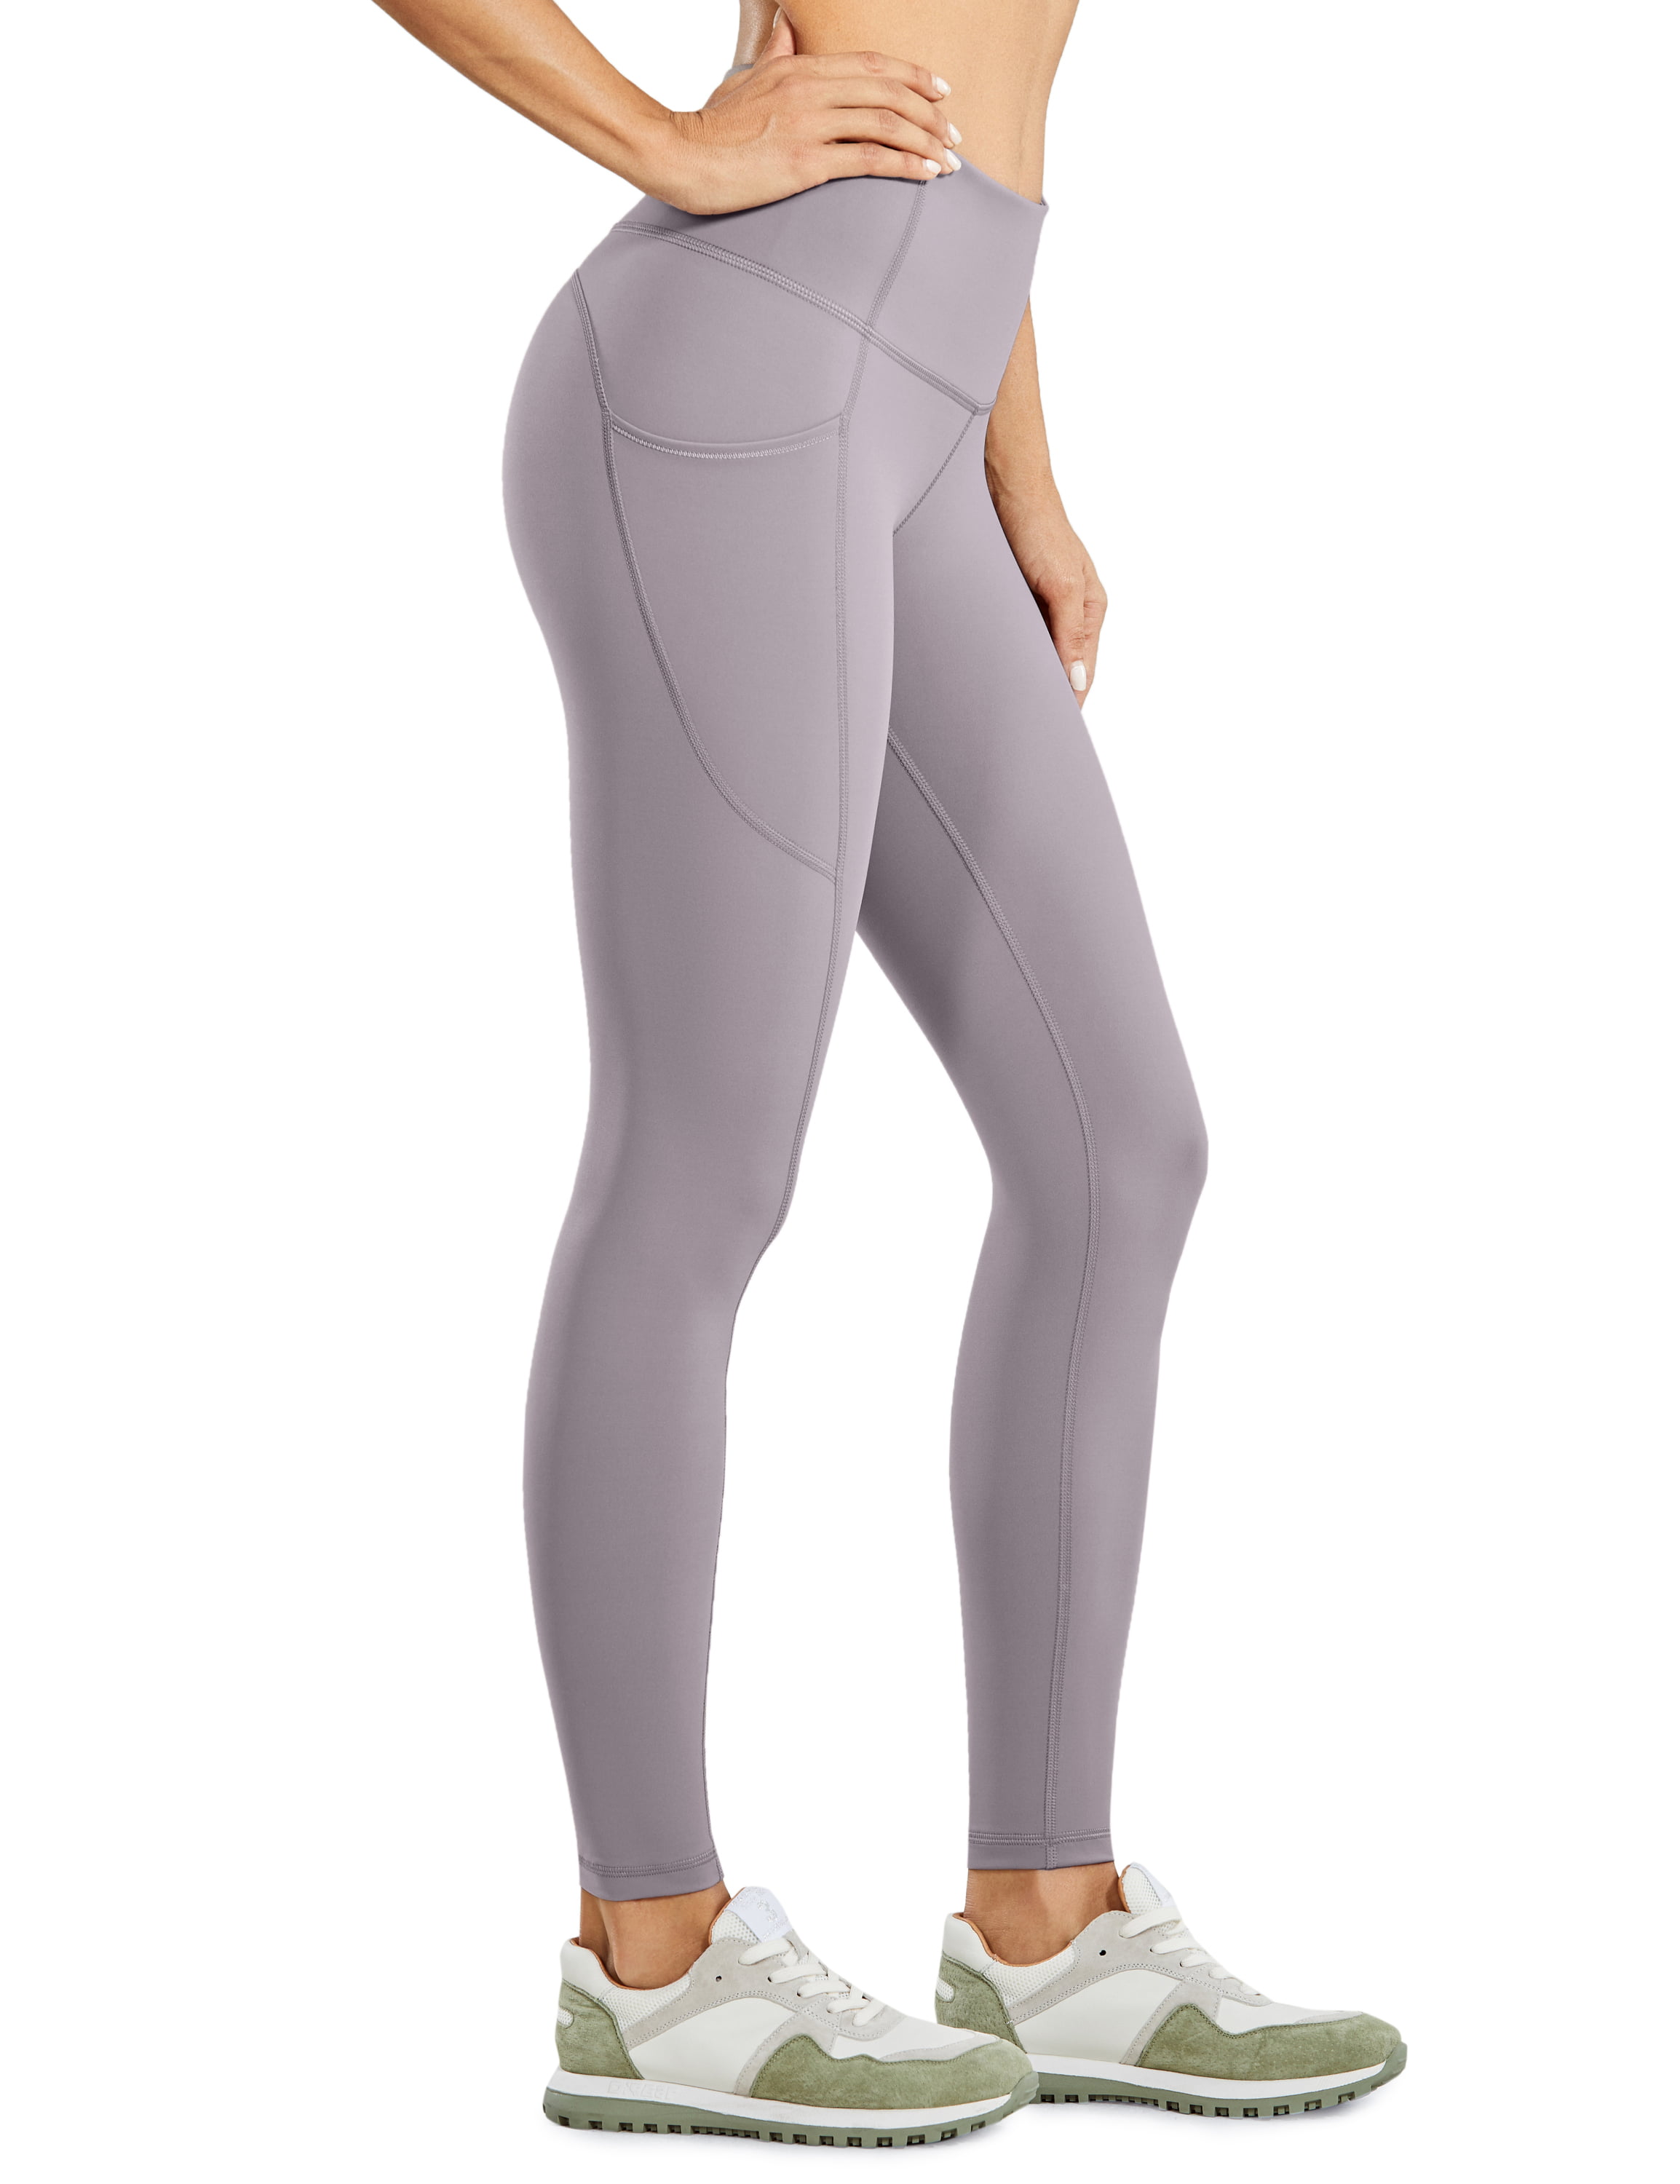 Compression Leggings For Women With Pockets